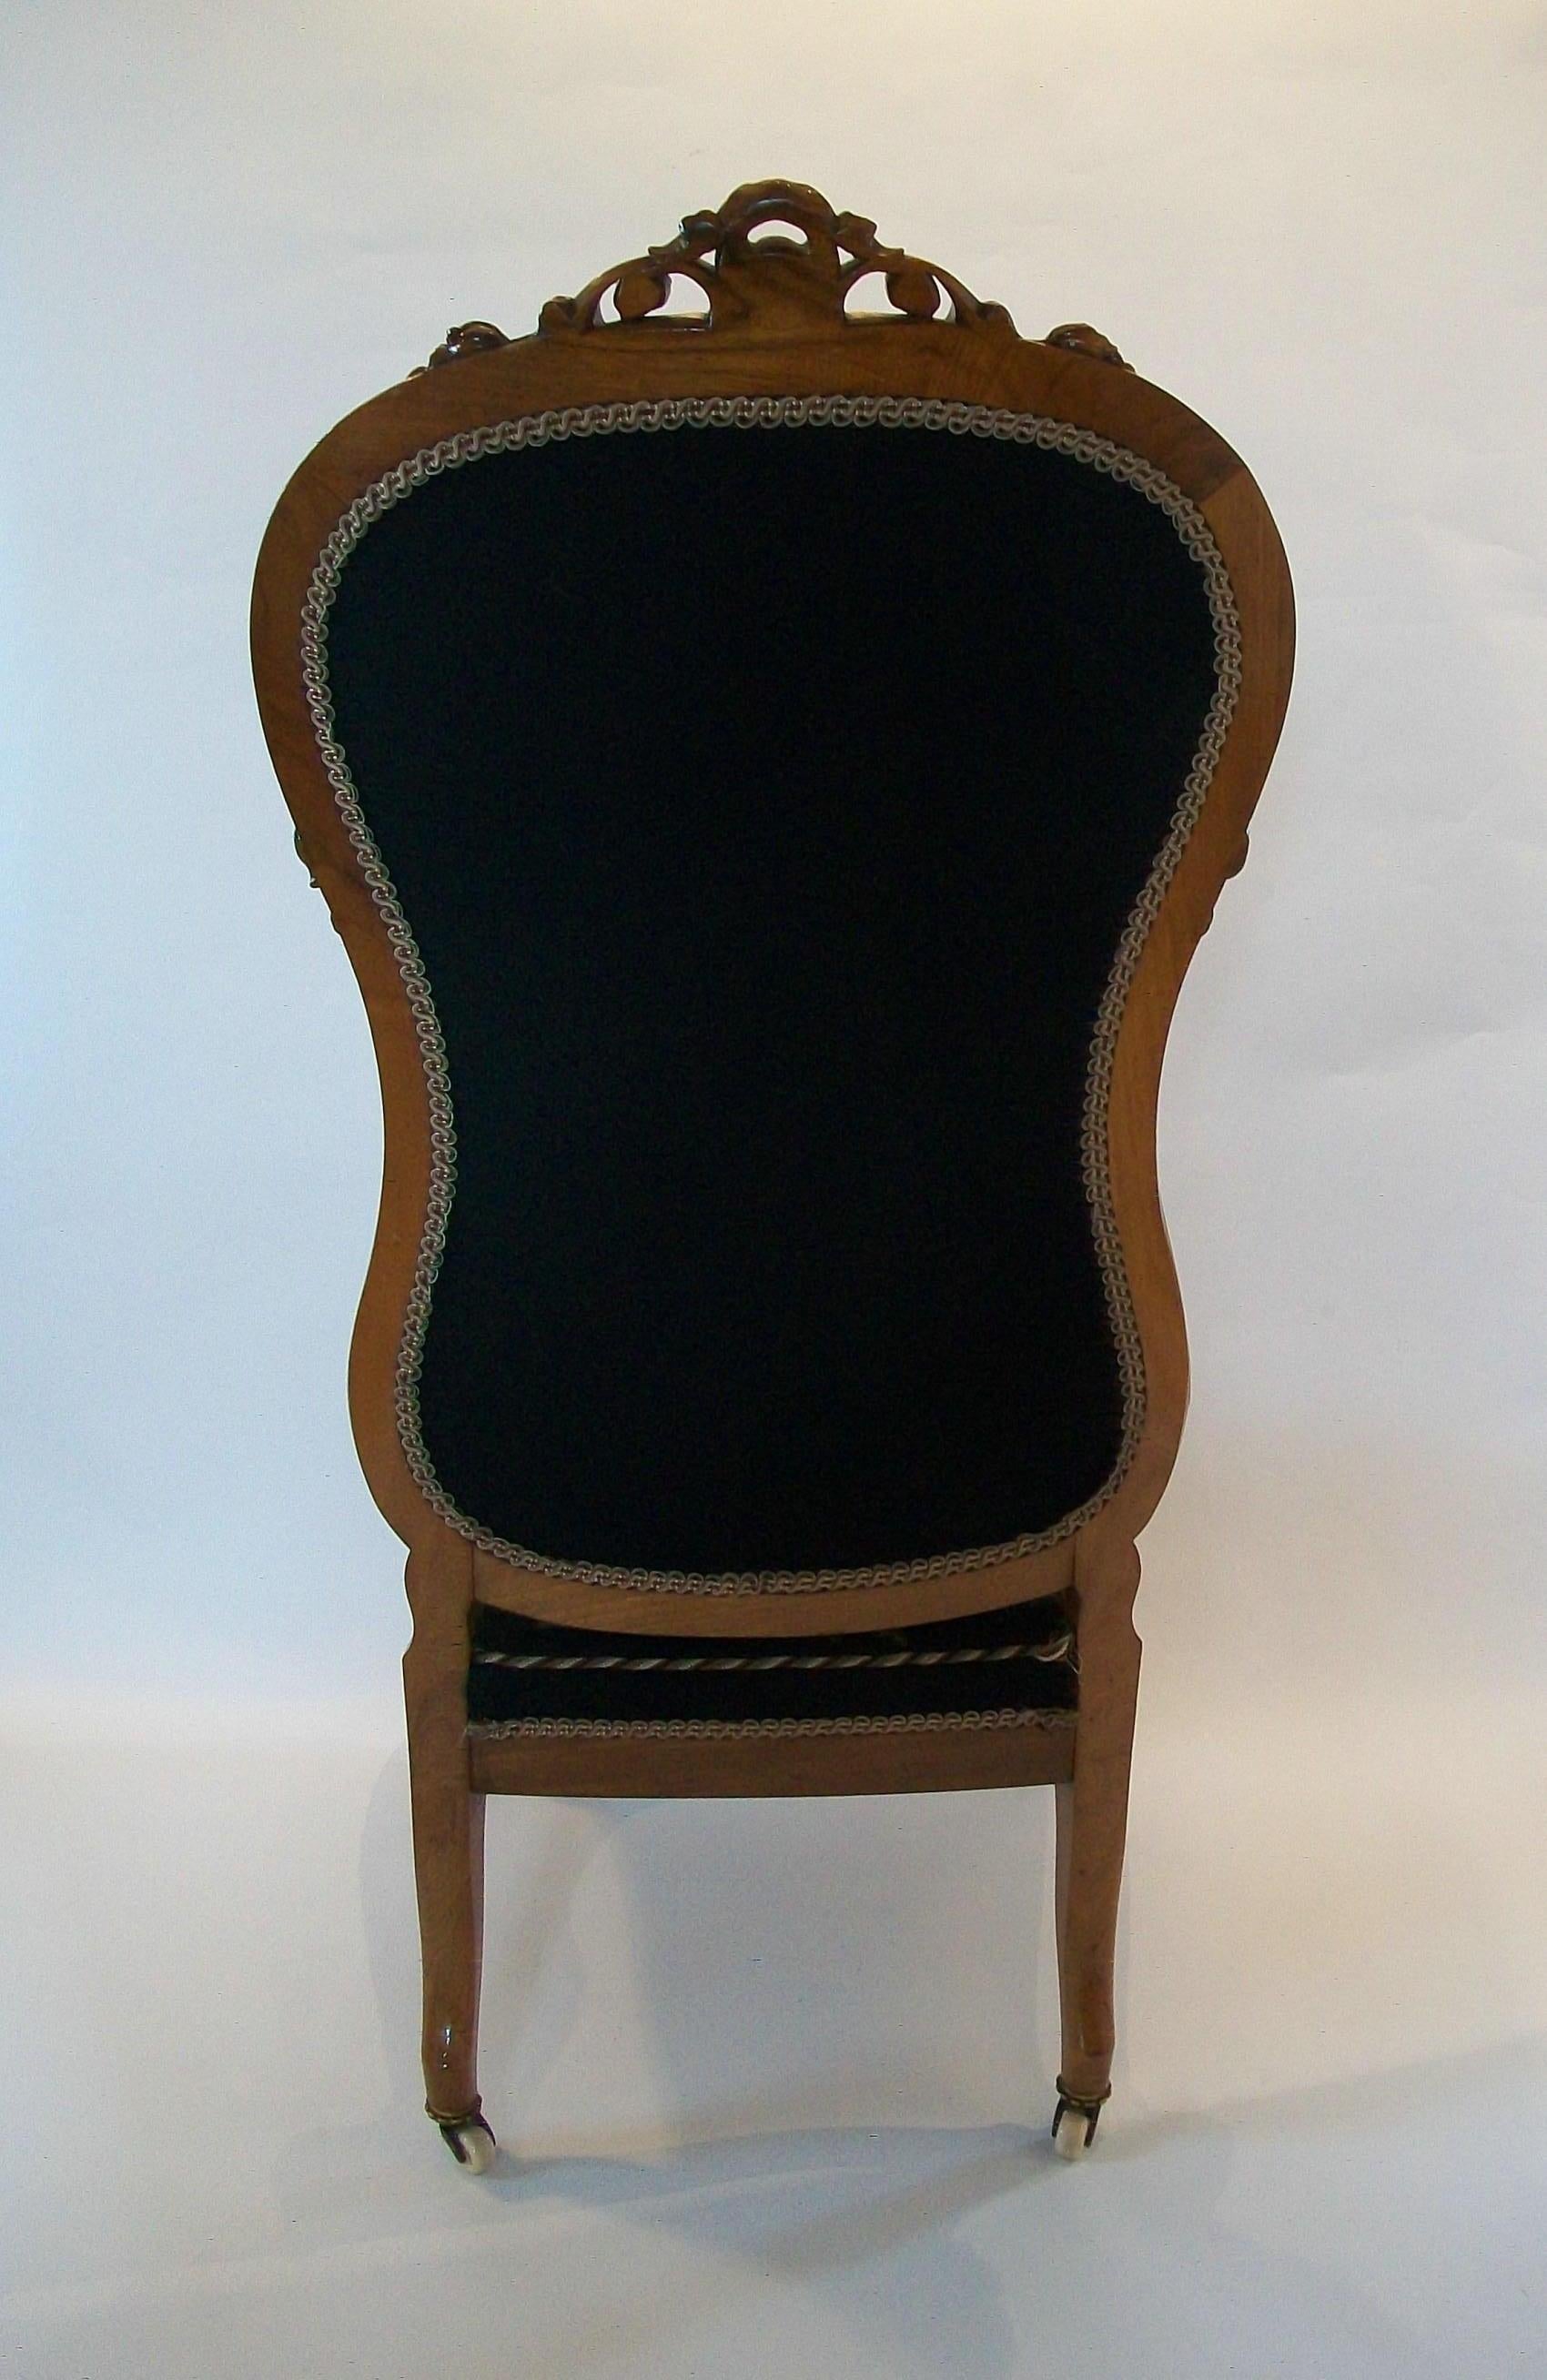 Hand-Crafted Victorian Walnut & Needlepoint Nursing Chair, United Kingdom, Mid-19th Century For Sale